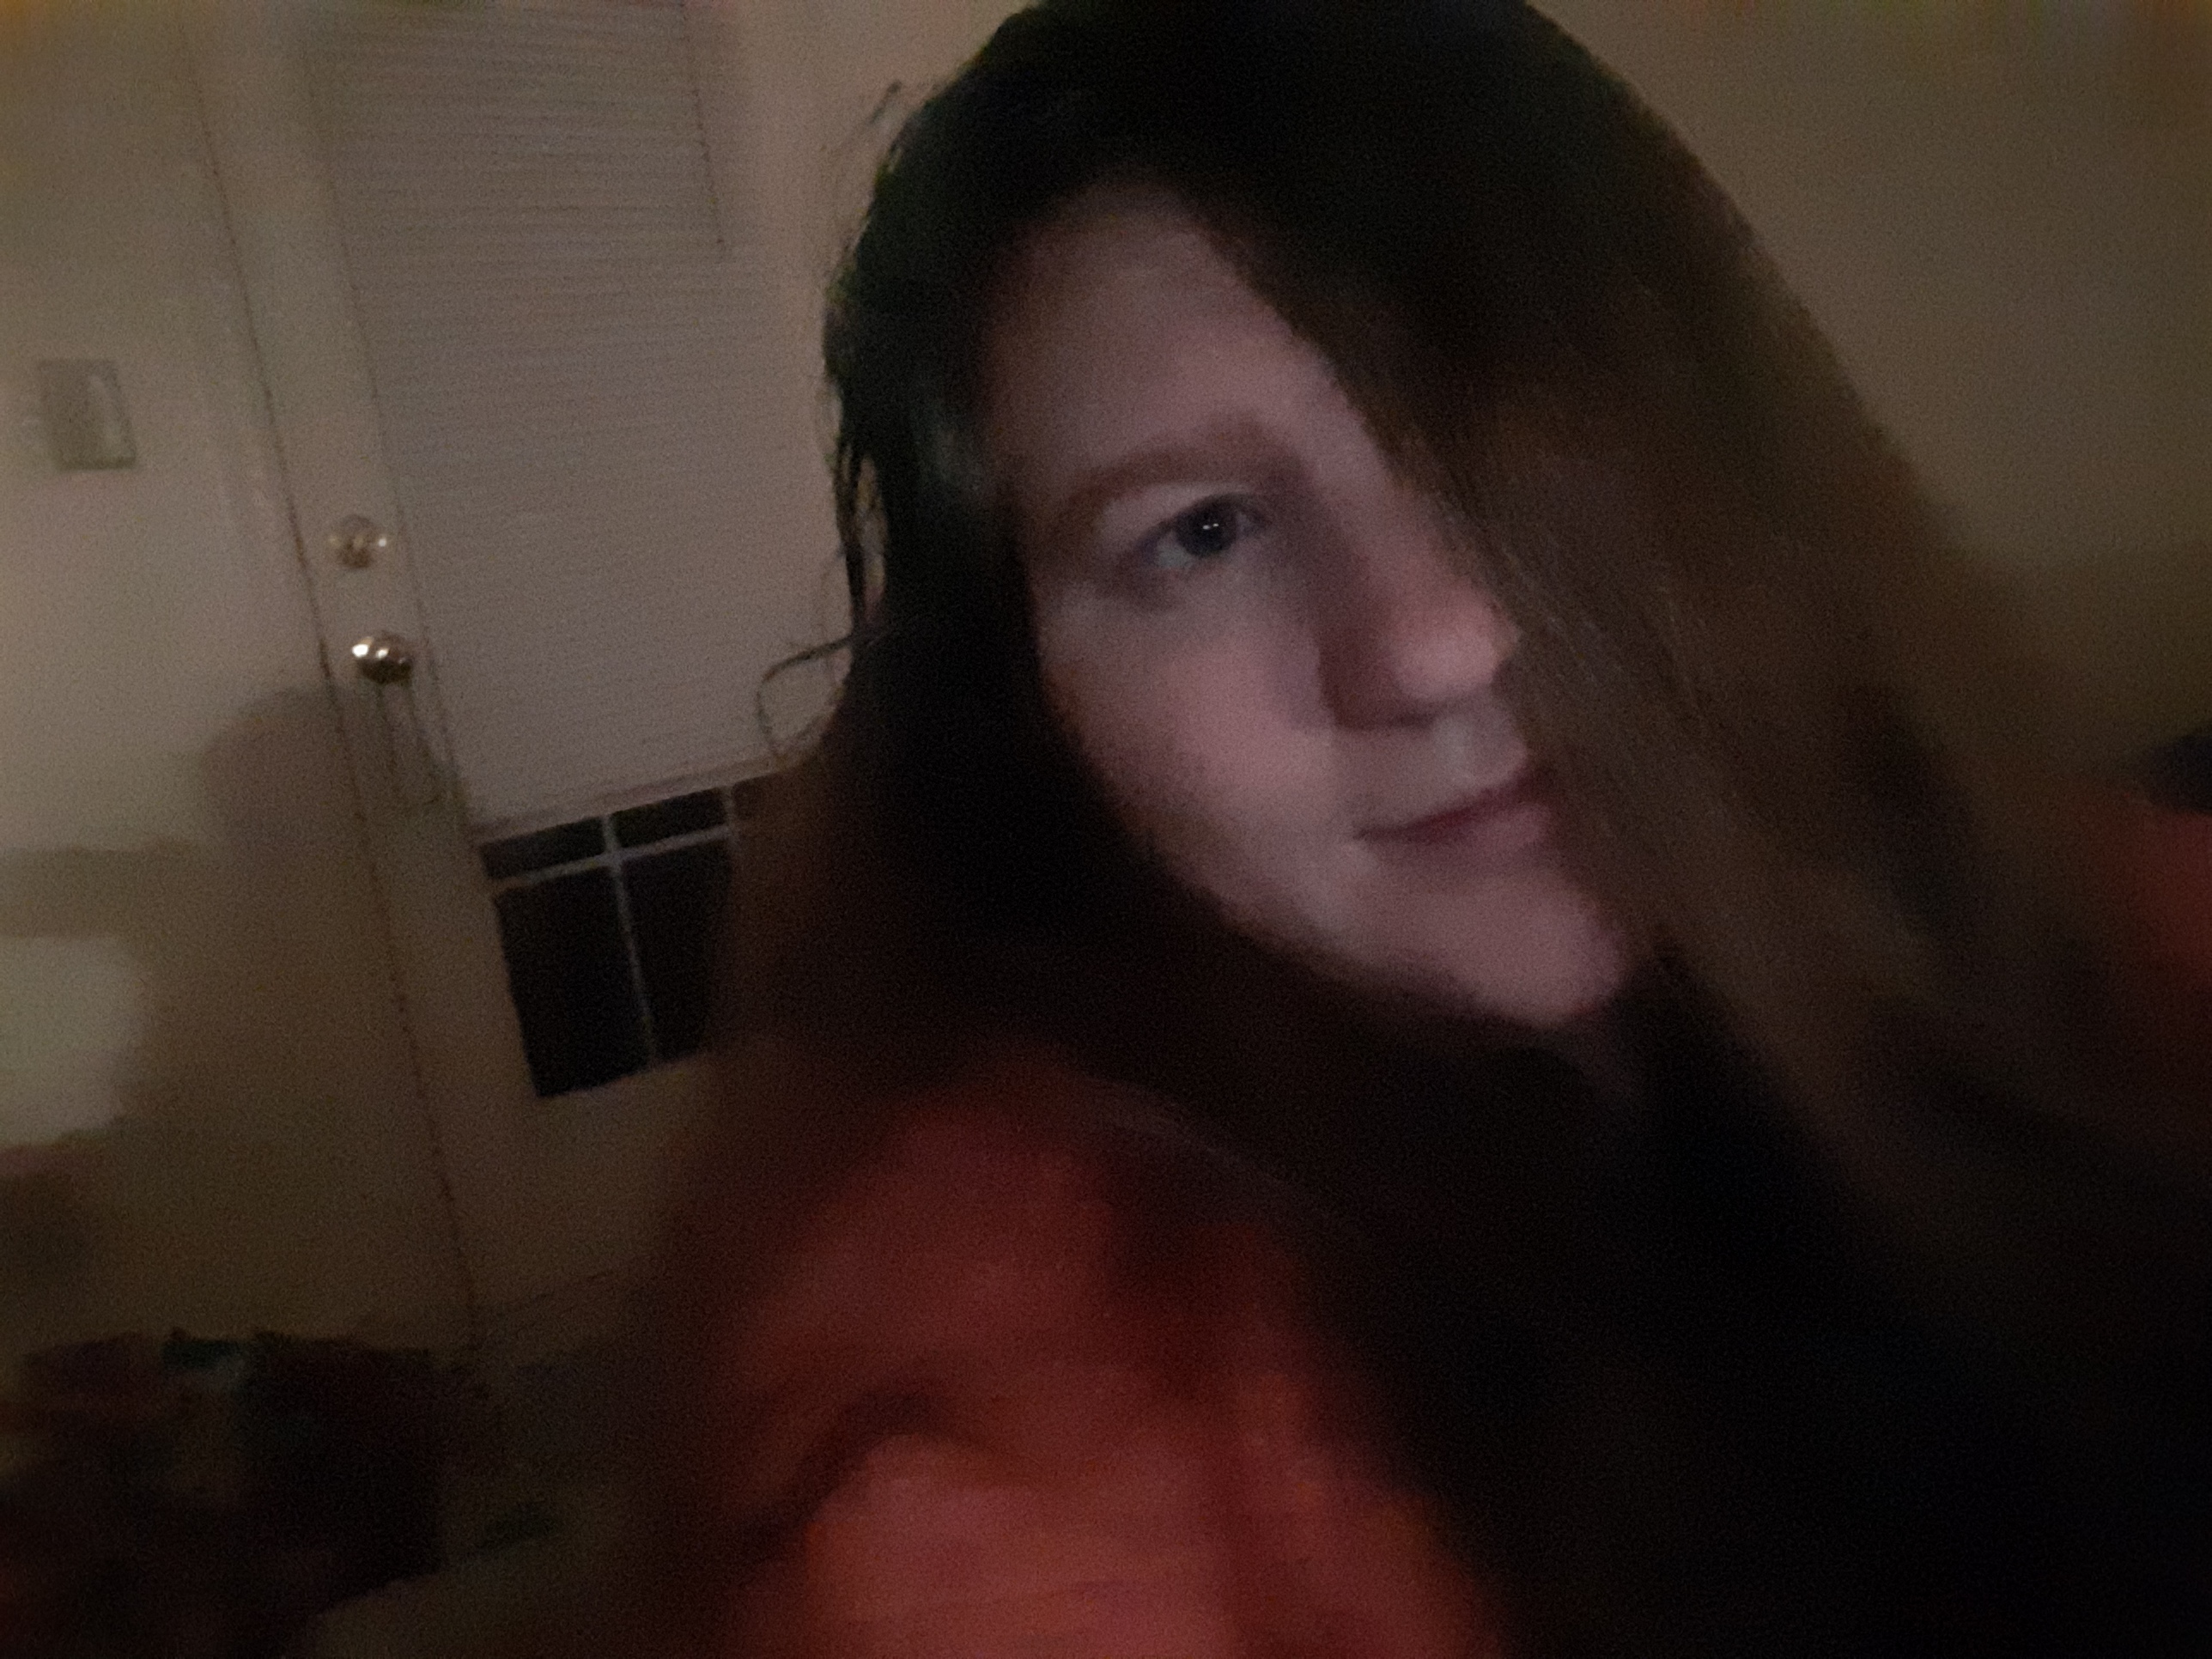 Hair play whose in I would love to play with long hair #ASMR #BrushingandStyling